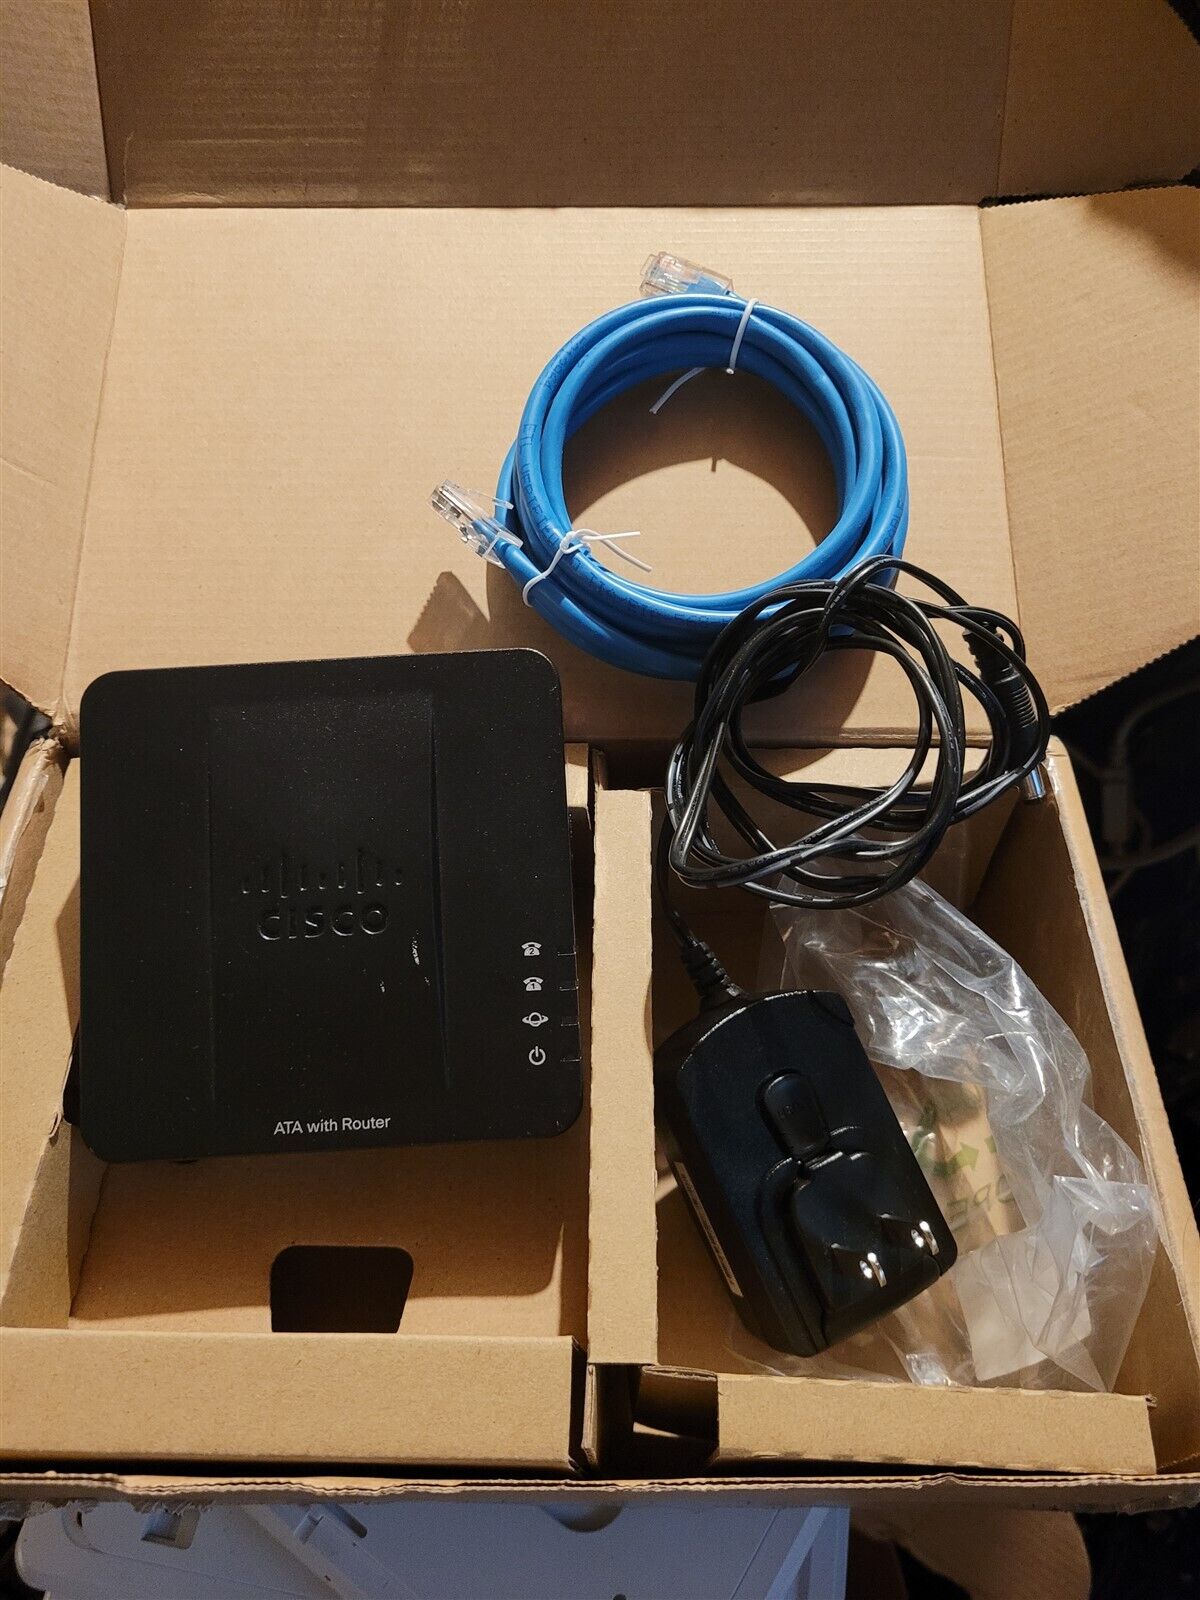 Cisco SPA122 ATA with Router 2 Port VOIP with Power Cord